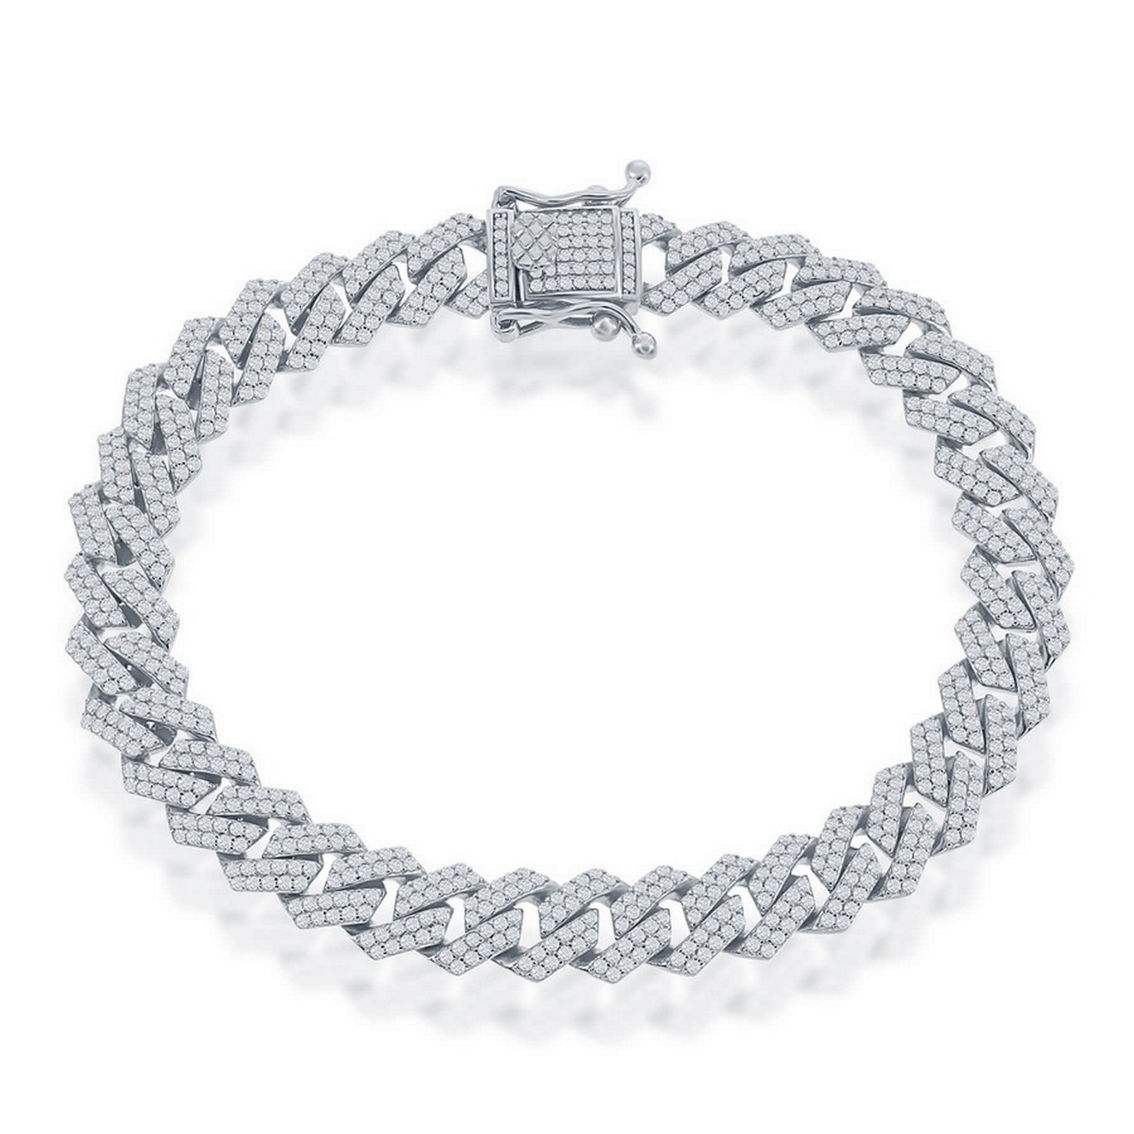 Links of Italy Sterling Silver 9mm Micro Pave Monaco Chain - Image 3 of 4